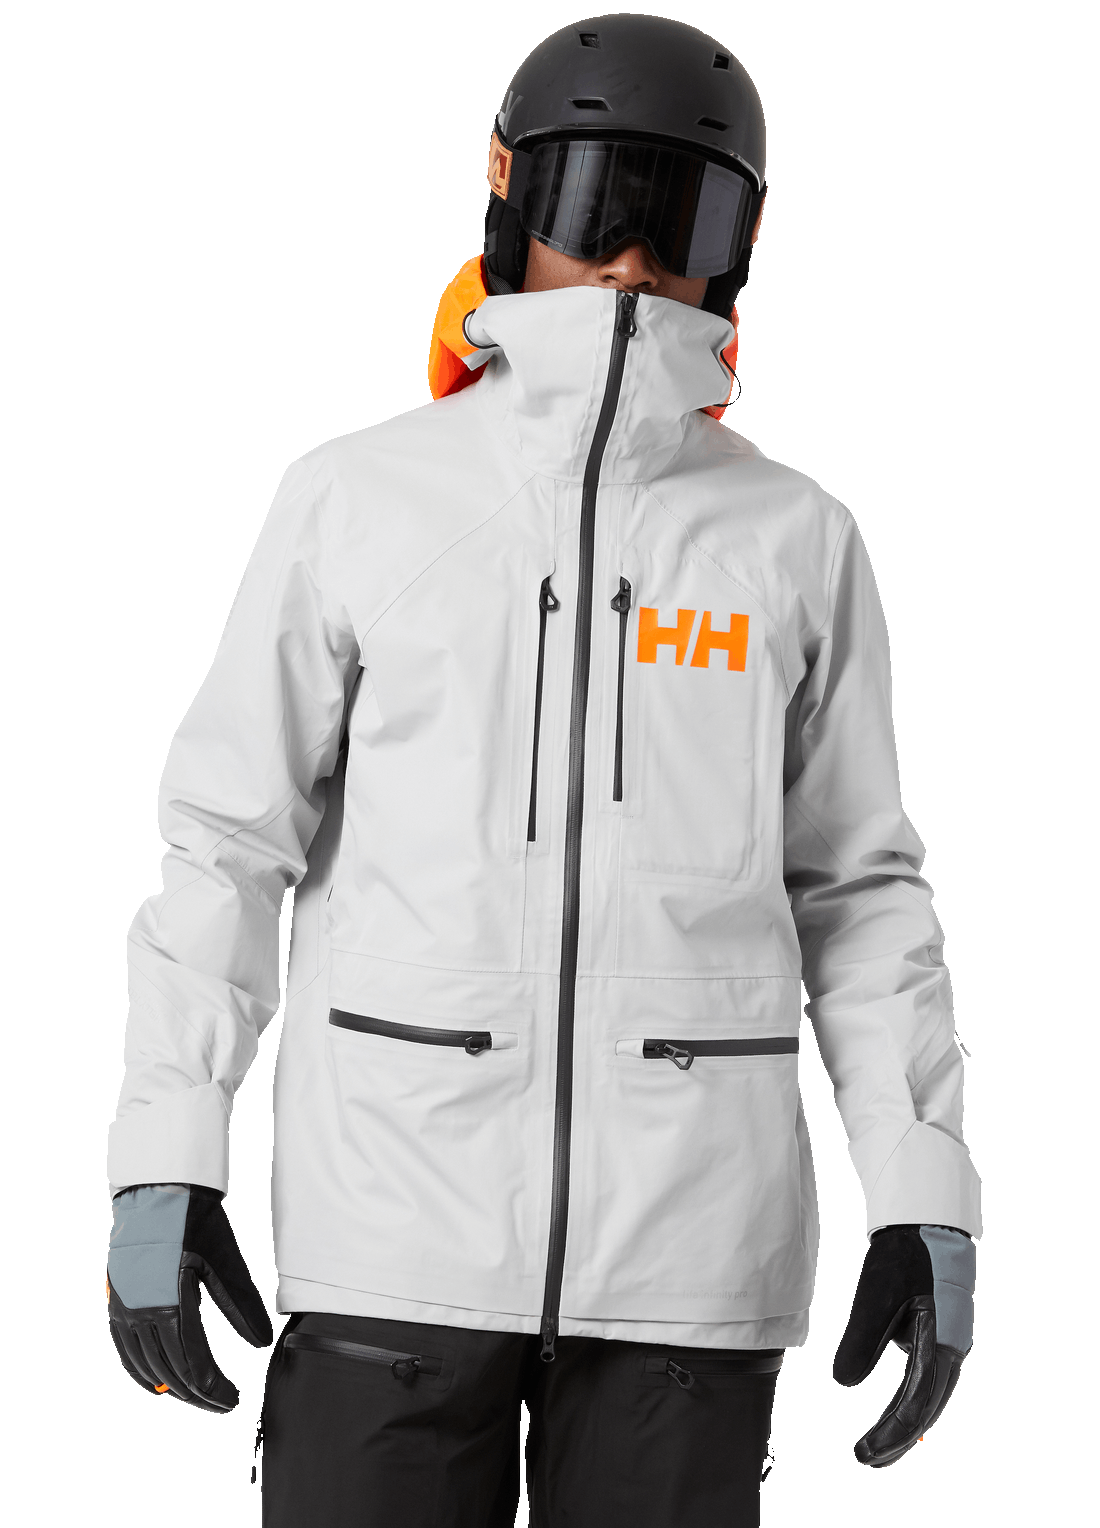 breakfast clarity Observe Helly Hansen Women's Whitewall Lifaloft 2.0 Insulated Jacket | Curated.com